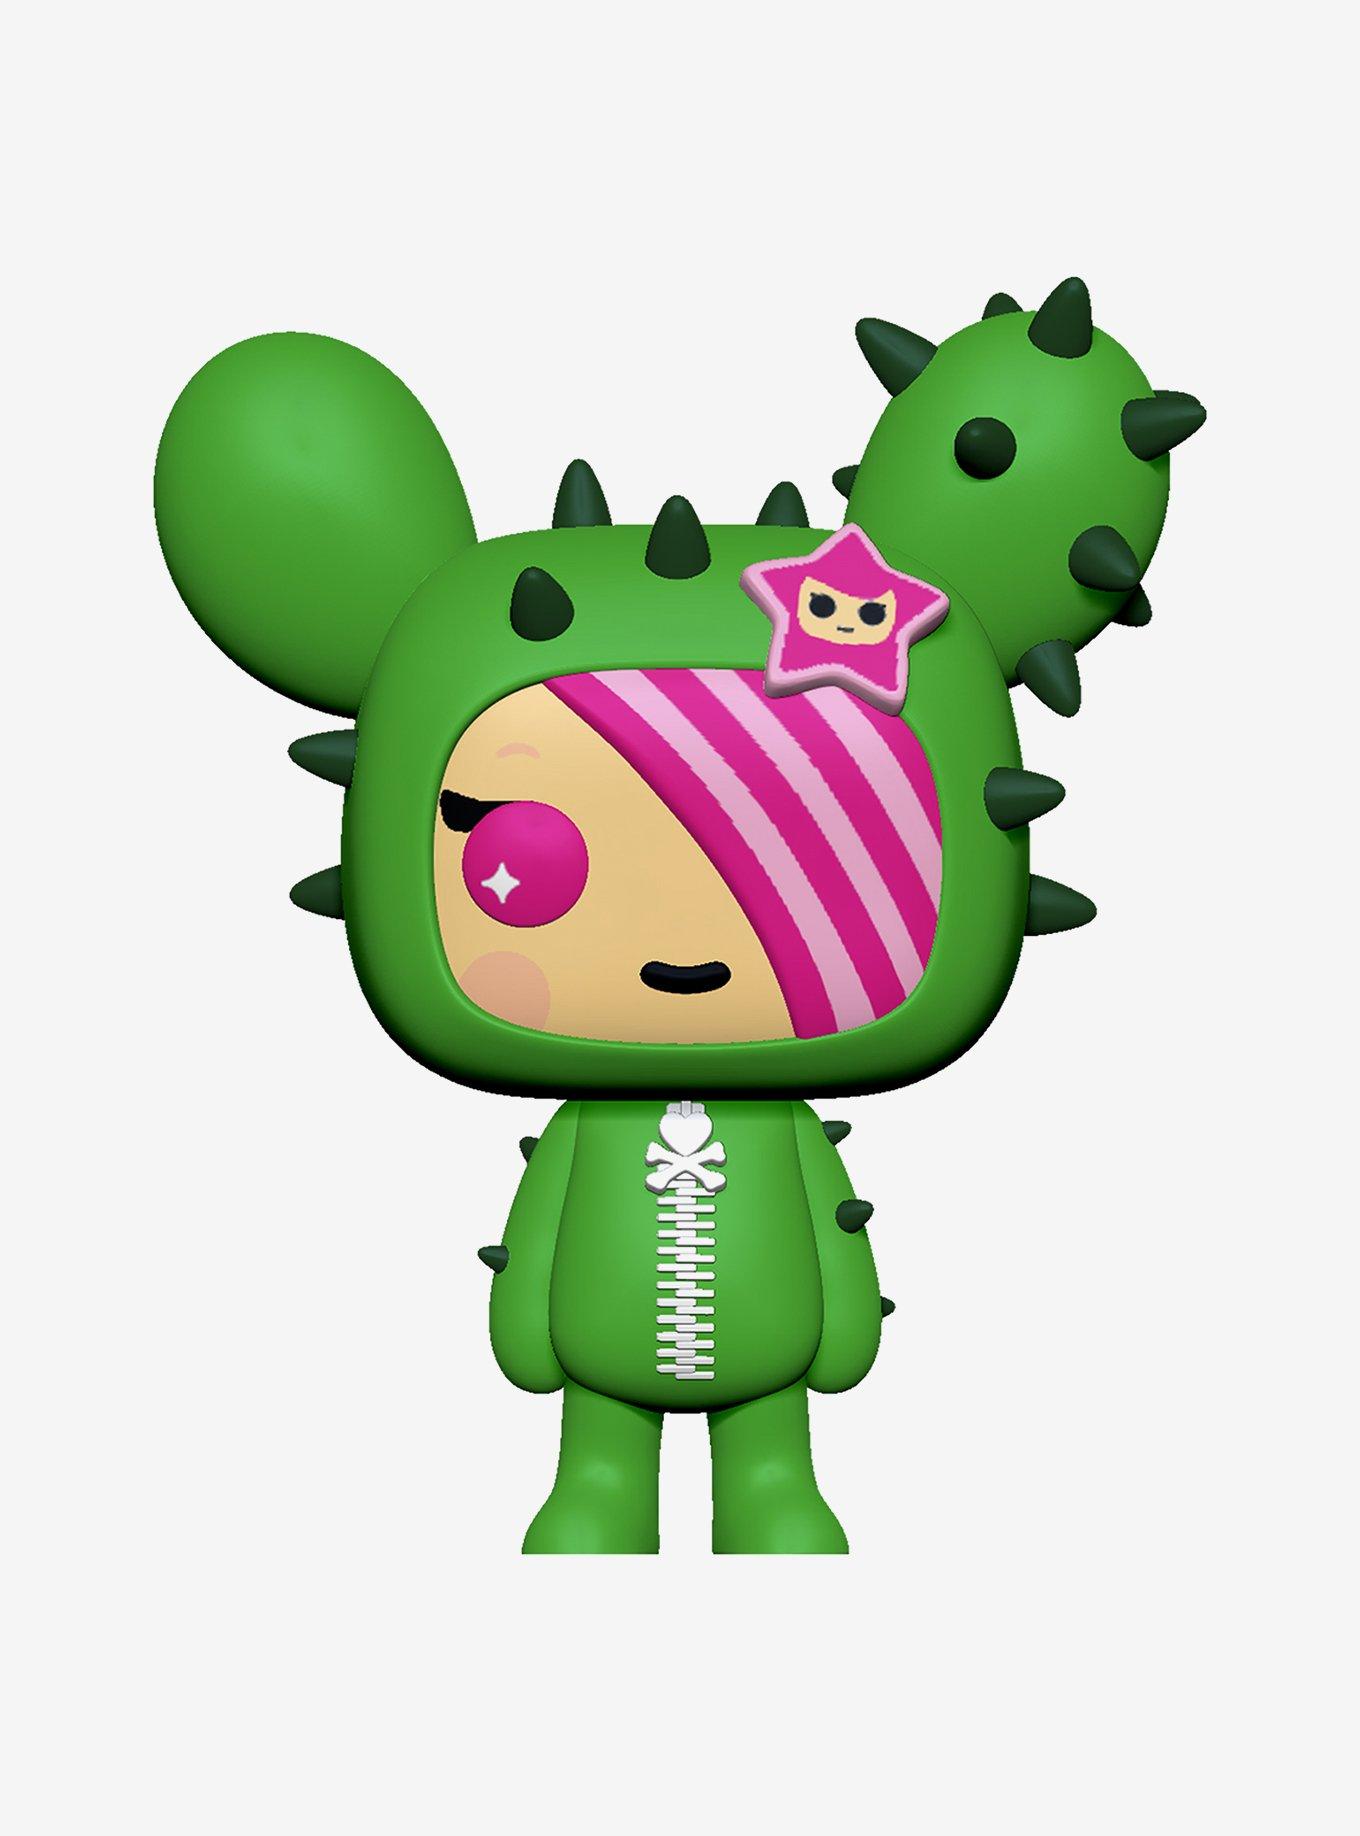 Sanrio Tokidoki Cactus Friends 6 inch plush (black eyes closed) - now  $11.95 and shipping is free*.